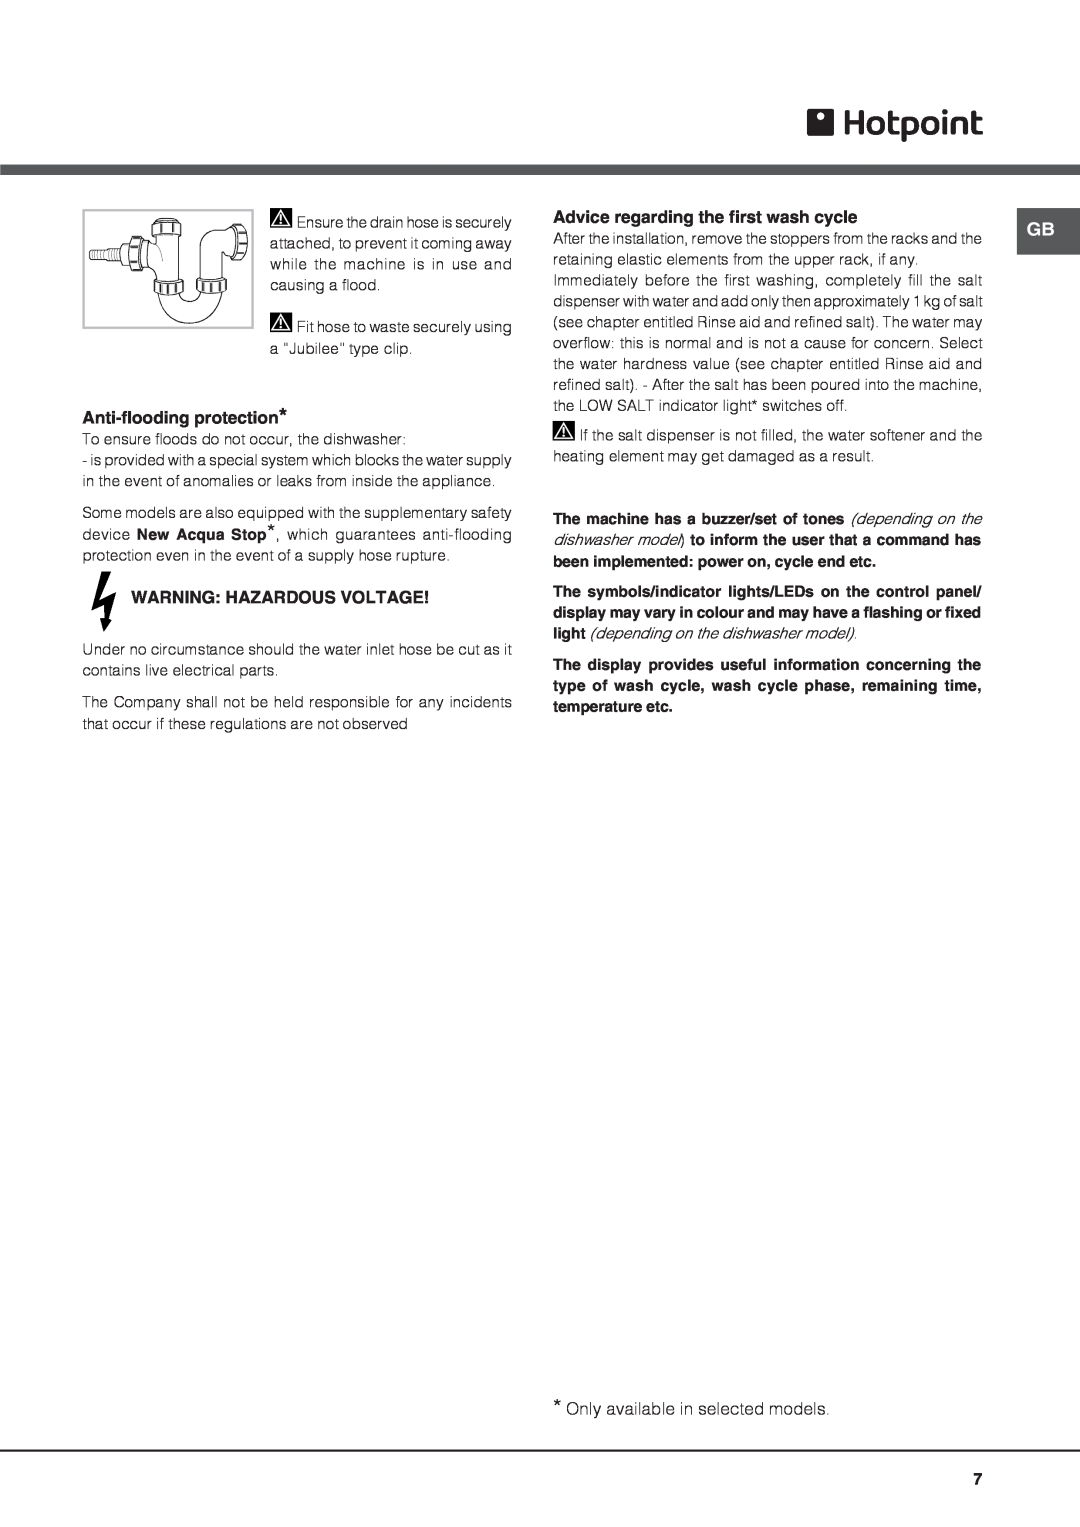 Hotpoint LTF 11S112 manual Anti-floodingprotection, Warning Hazardous Voltage, Advice regarding the first wash cycle 